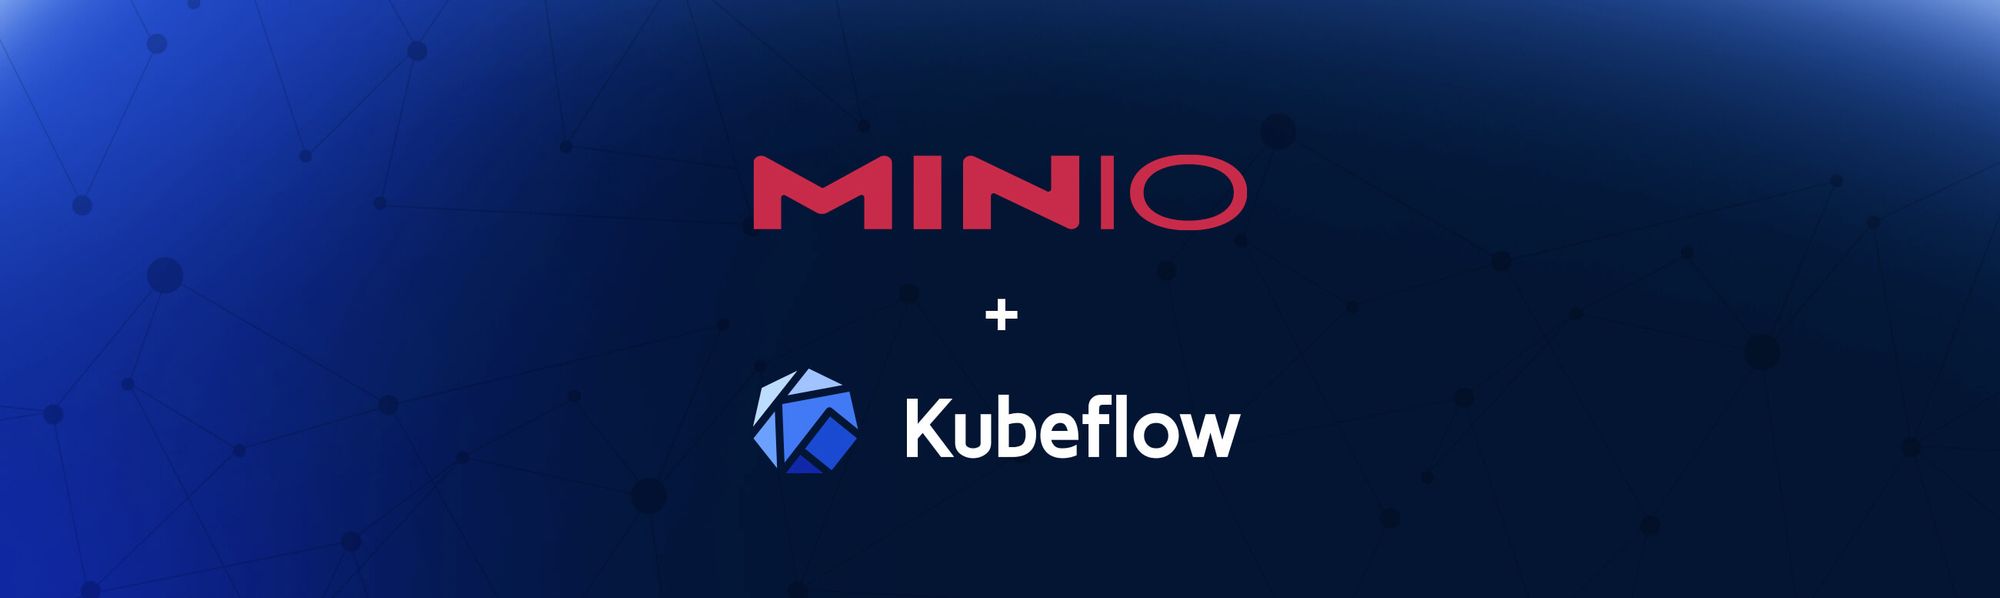 Building an ML Data Pipeline with MinIO and Kubeflow v2.0